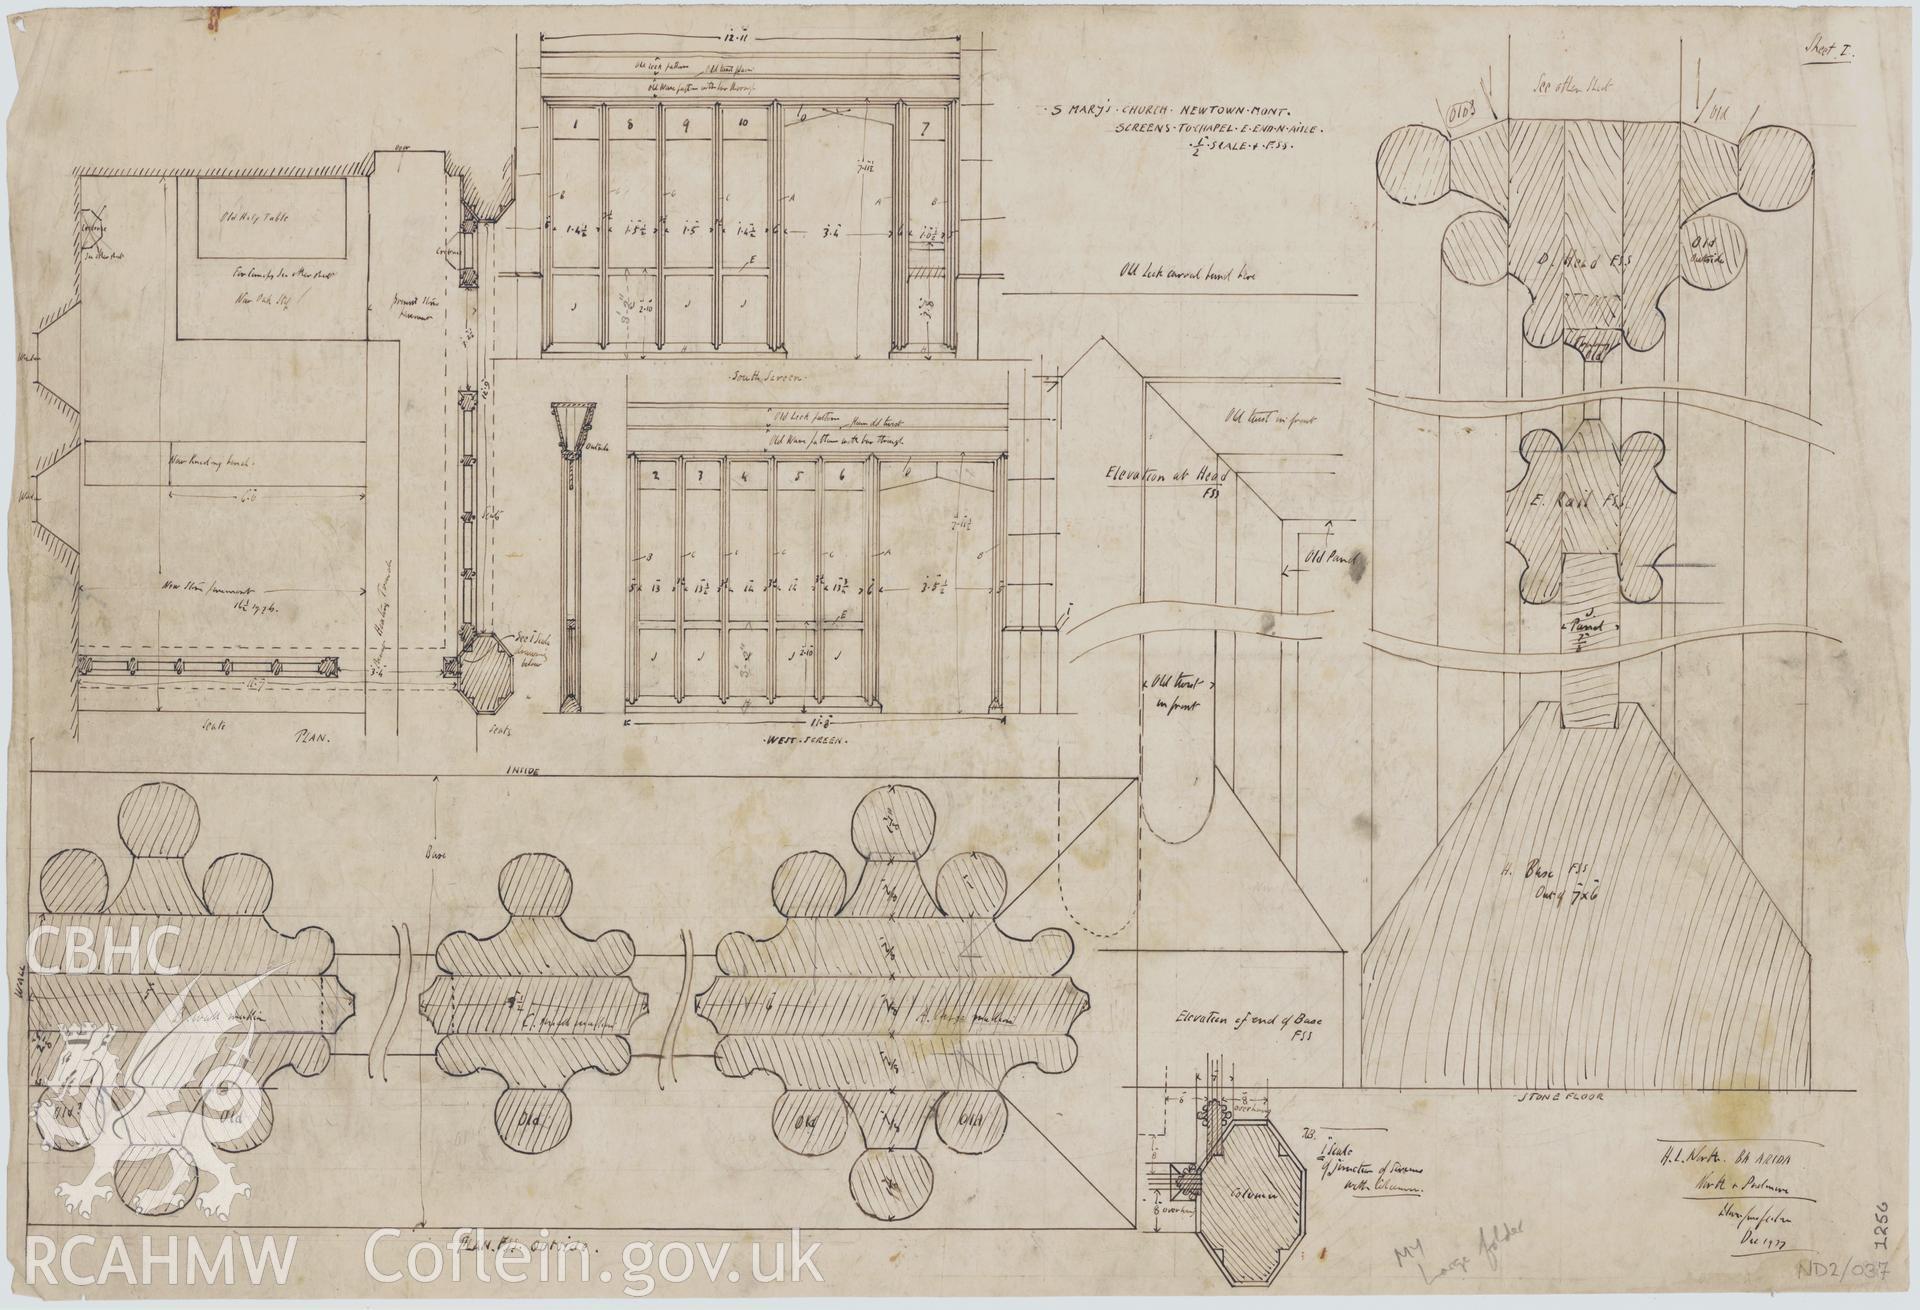 Plans, elevations and details for screens to the chapel at the east end of the north aisle of St Mary's New Church, Newtown, scale two feet to one inch, ink on paper.